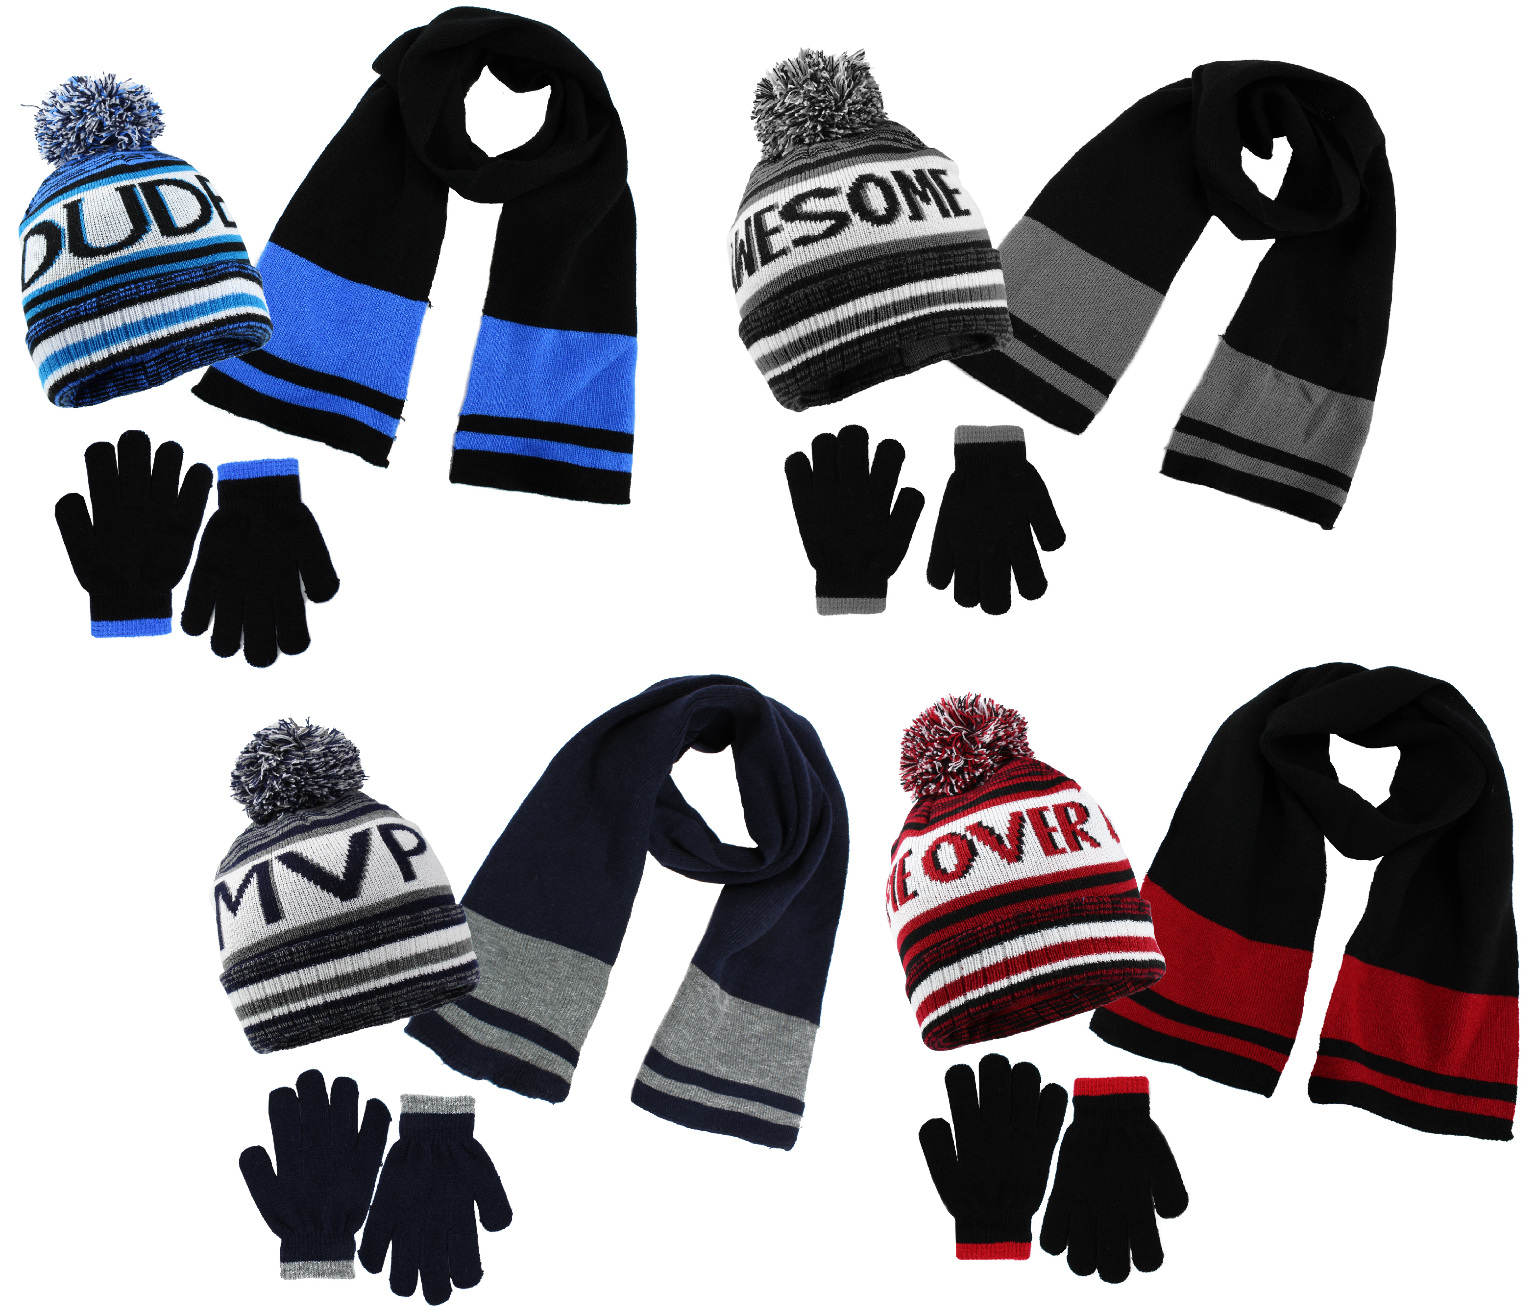 Boy's 3 Piece Two Tone Hat, Glove Scarf Set - Assorted Colors, Youth Size